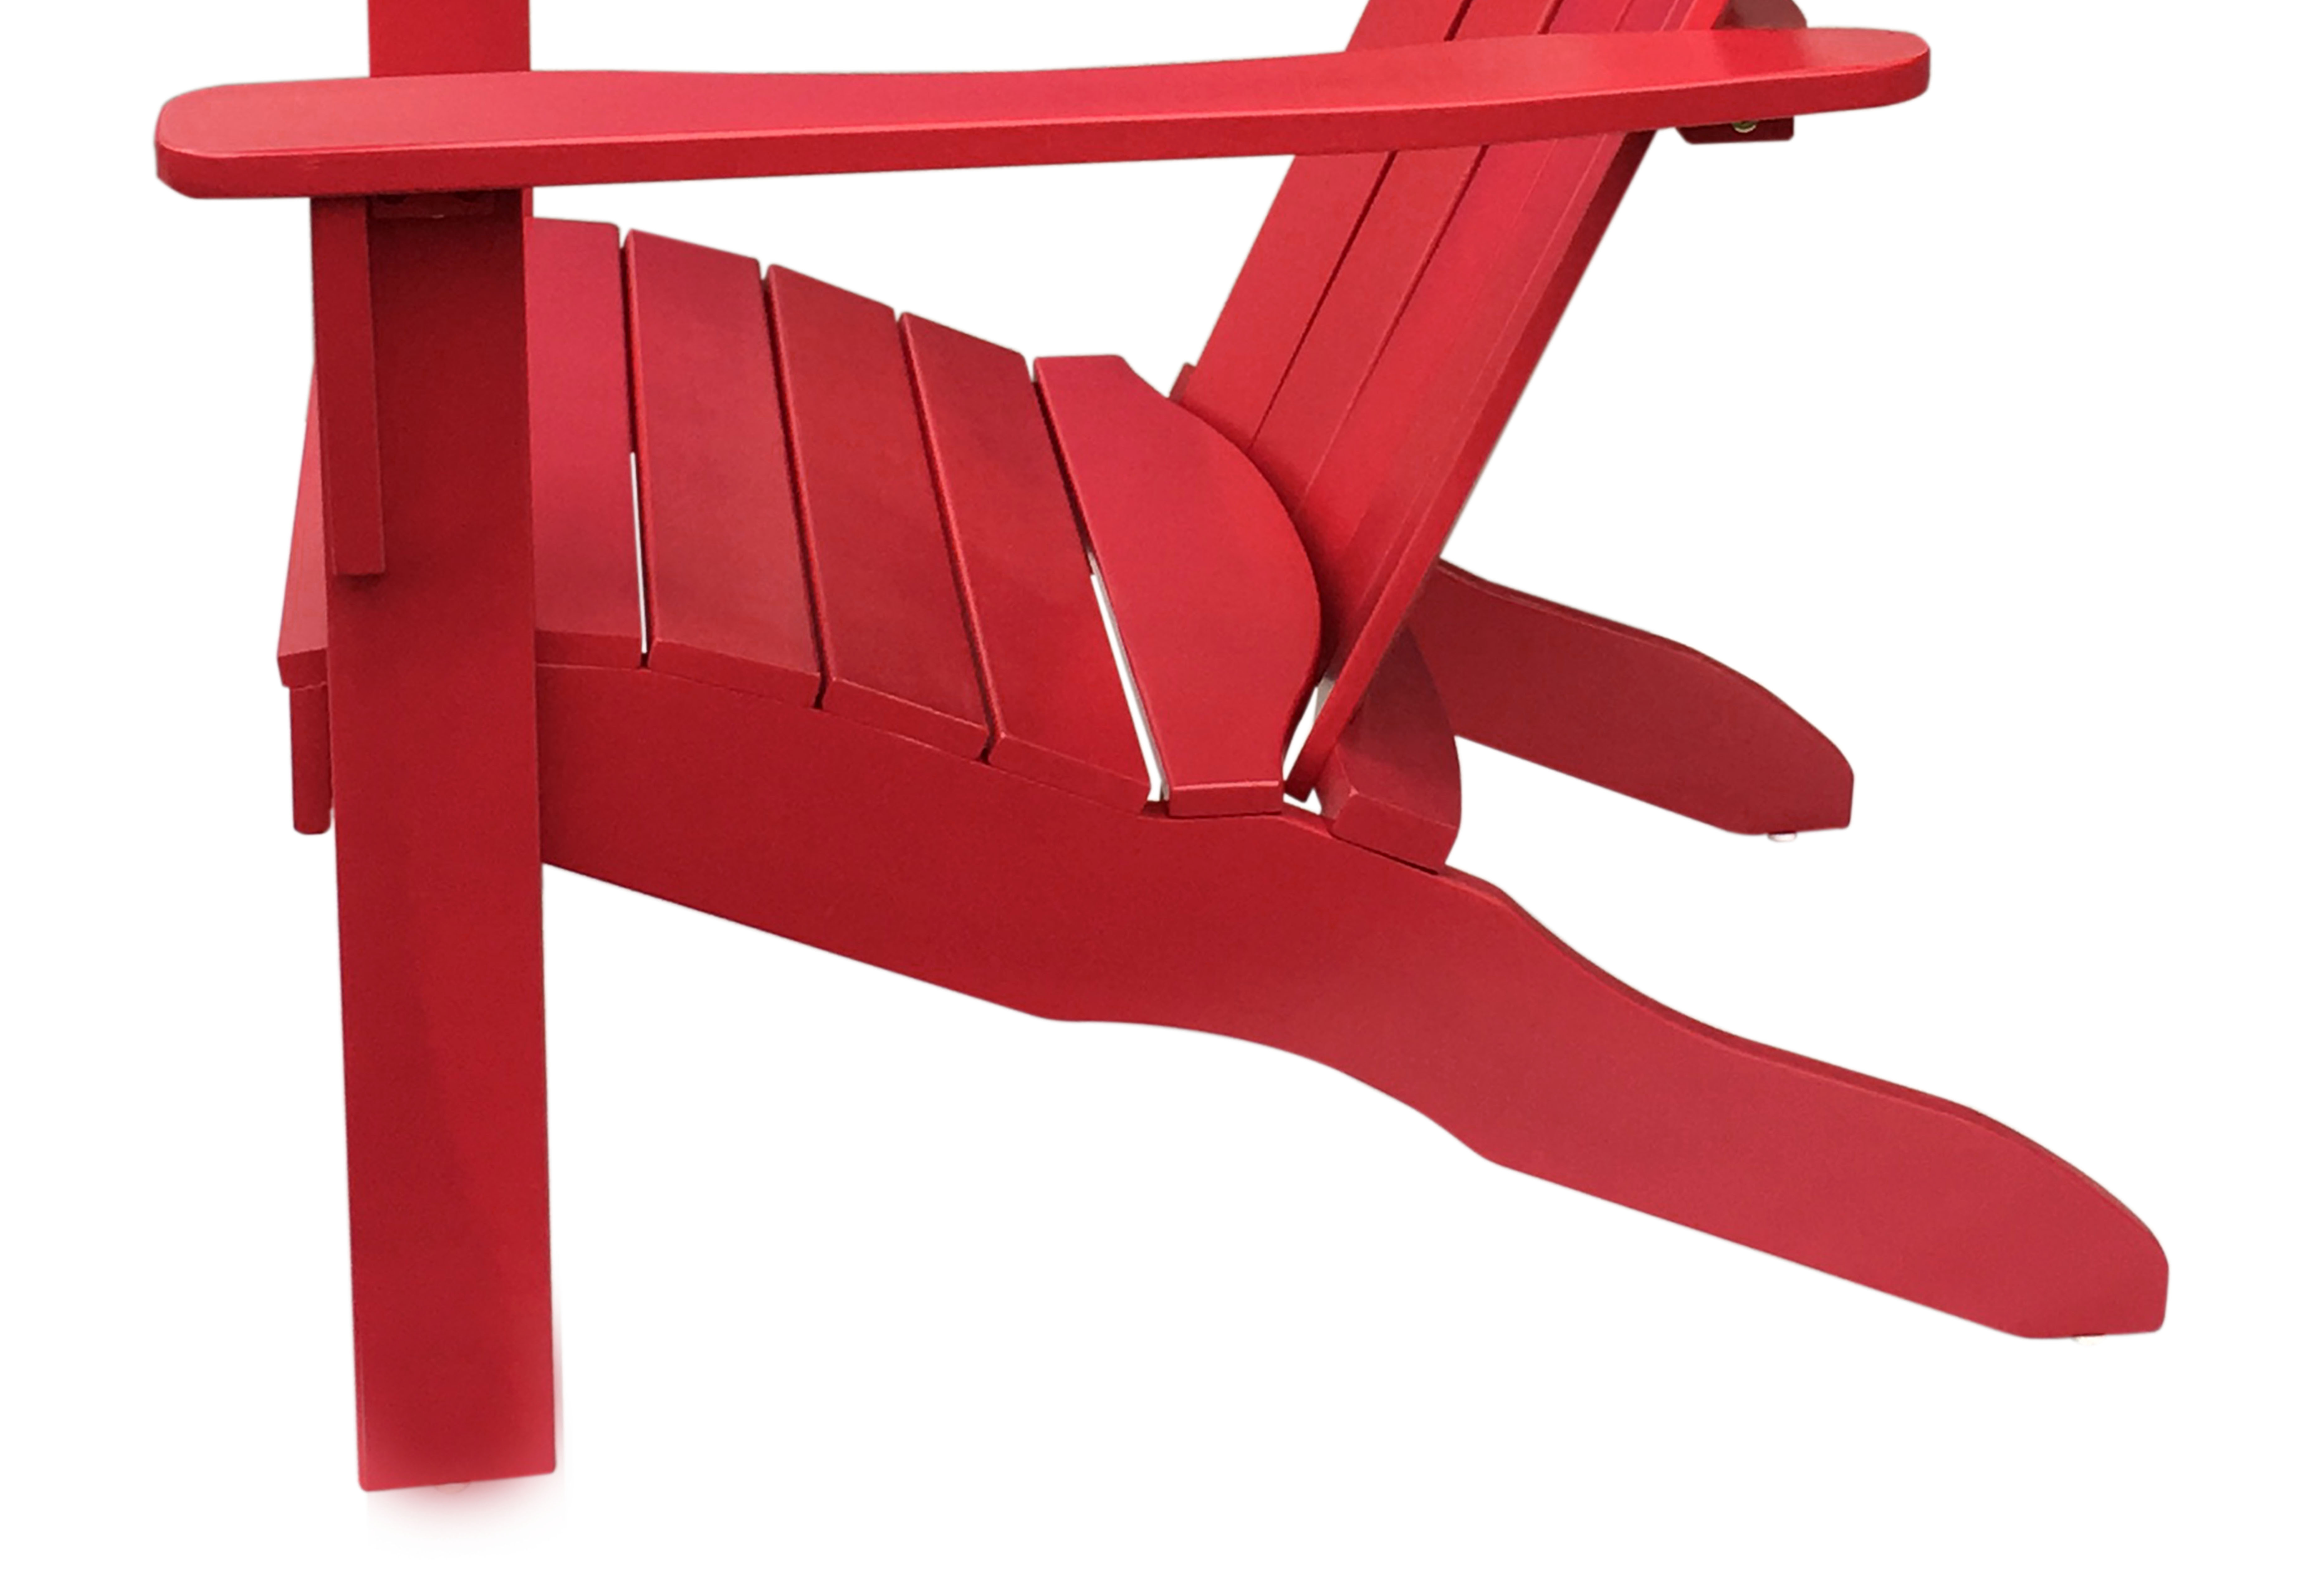 Mainstays Wood Outdoor Adirondack Chair, Red Color - image 5 of 8